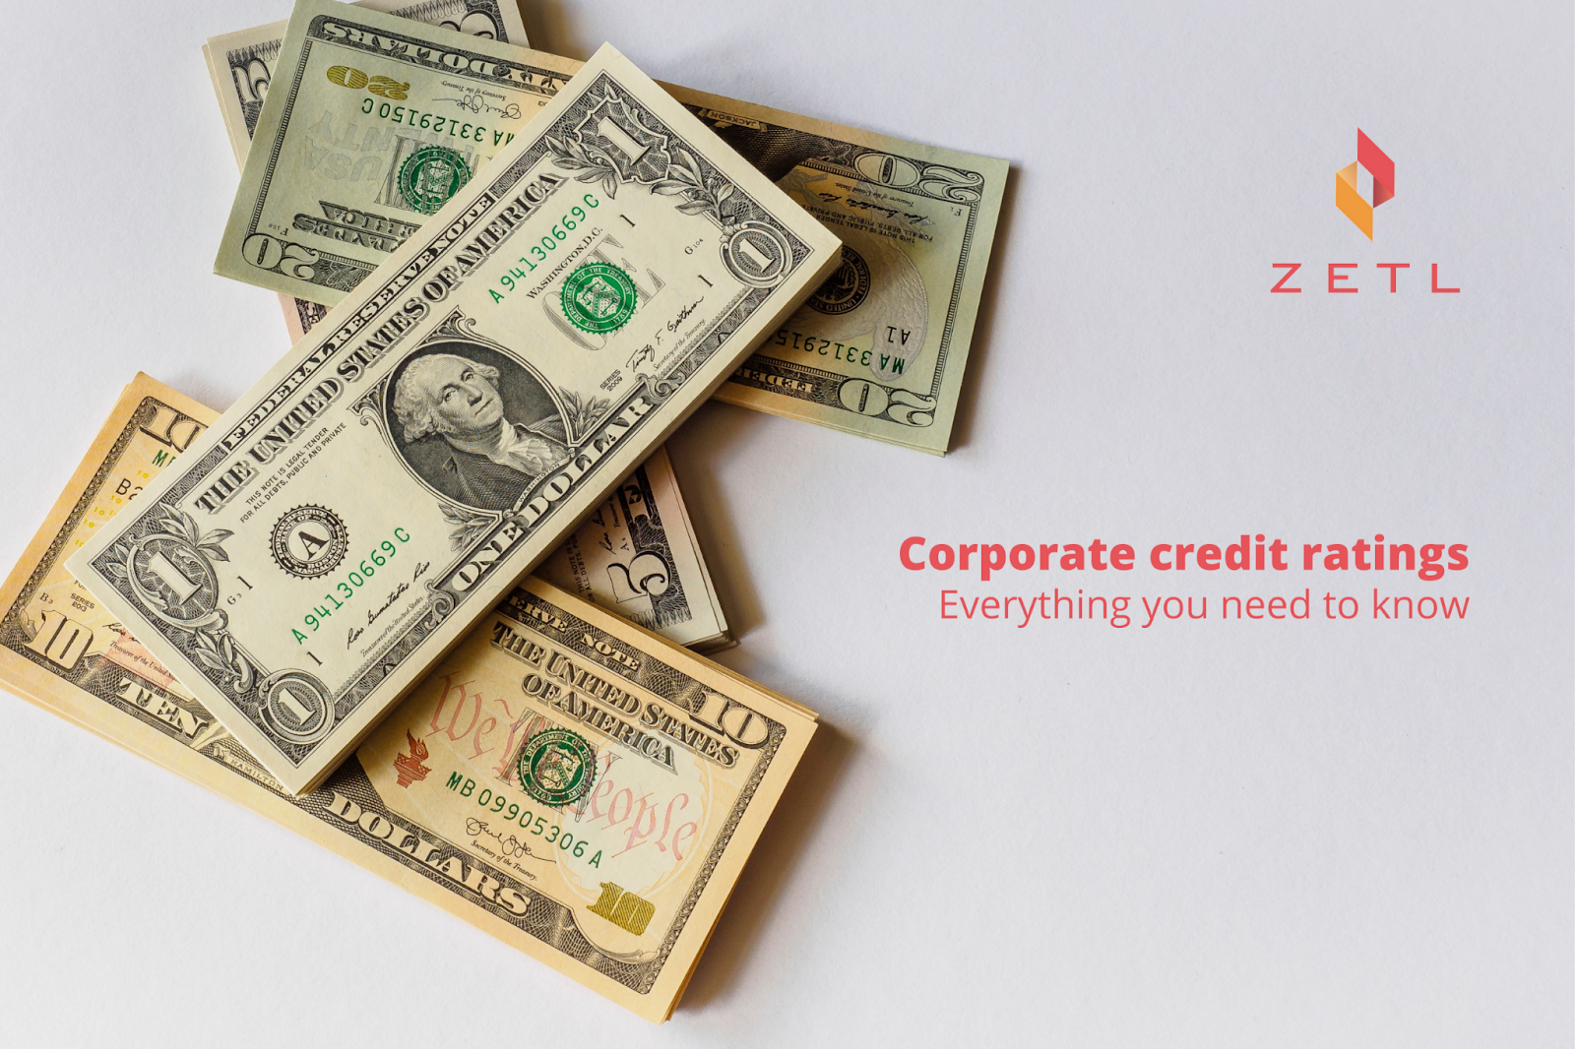 Everything You Need to Know About Corporate Credit Ratings